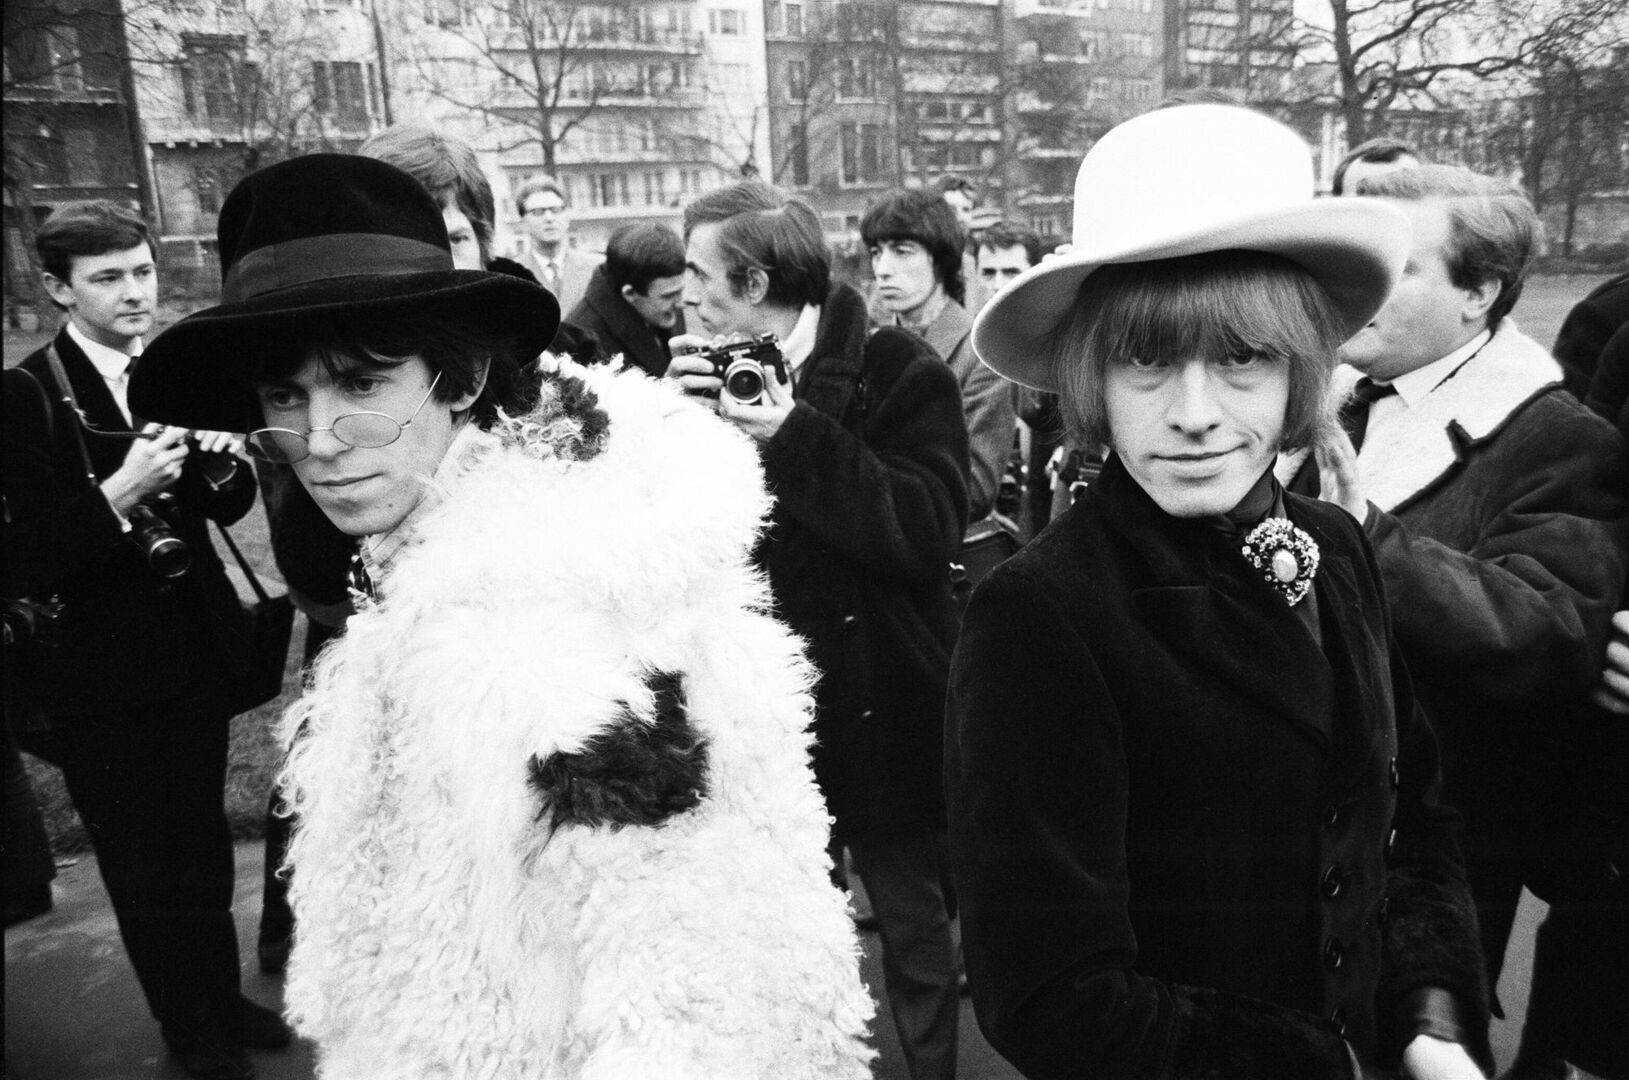 The-Stones-and-Brian-Jones_st_1_jpg_sd-high_Copyright-Getty-Images-Photo-courtesy-of-Magnolia-Pictures